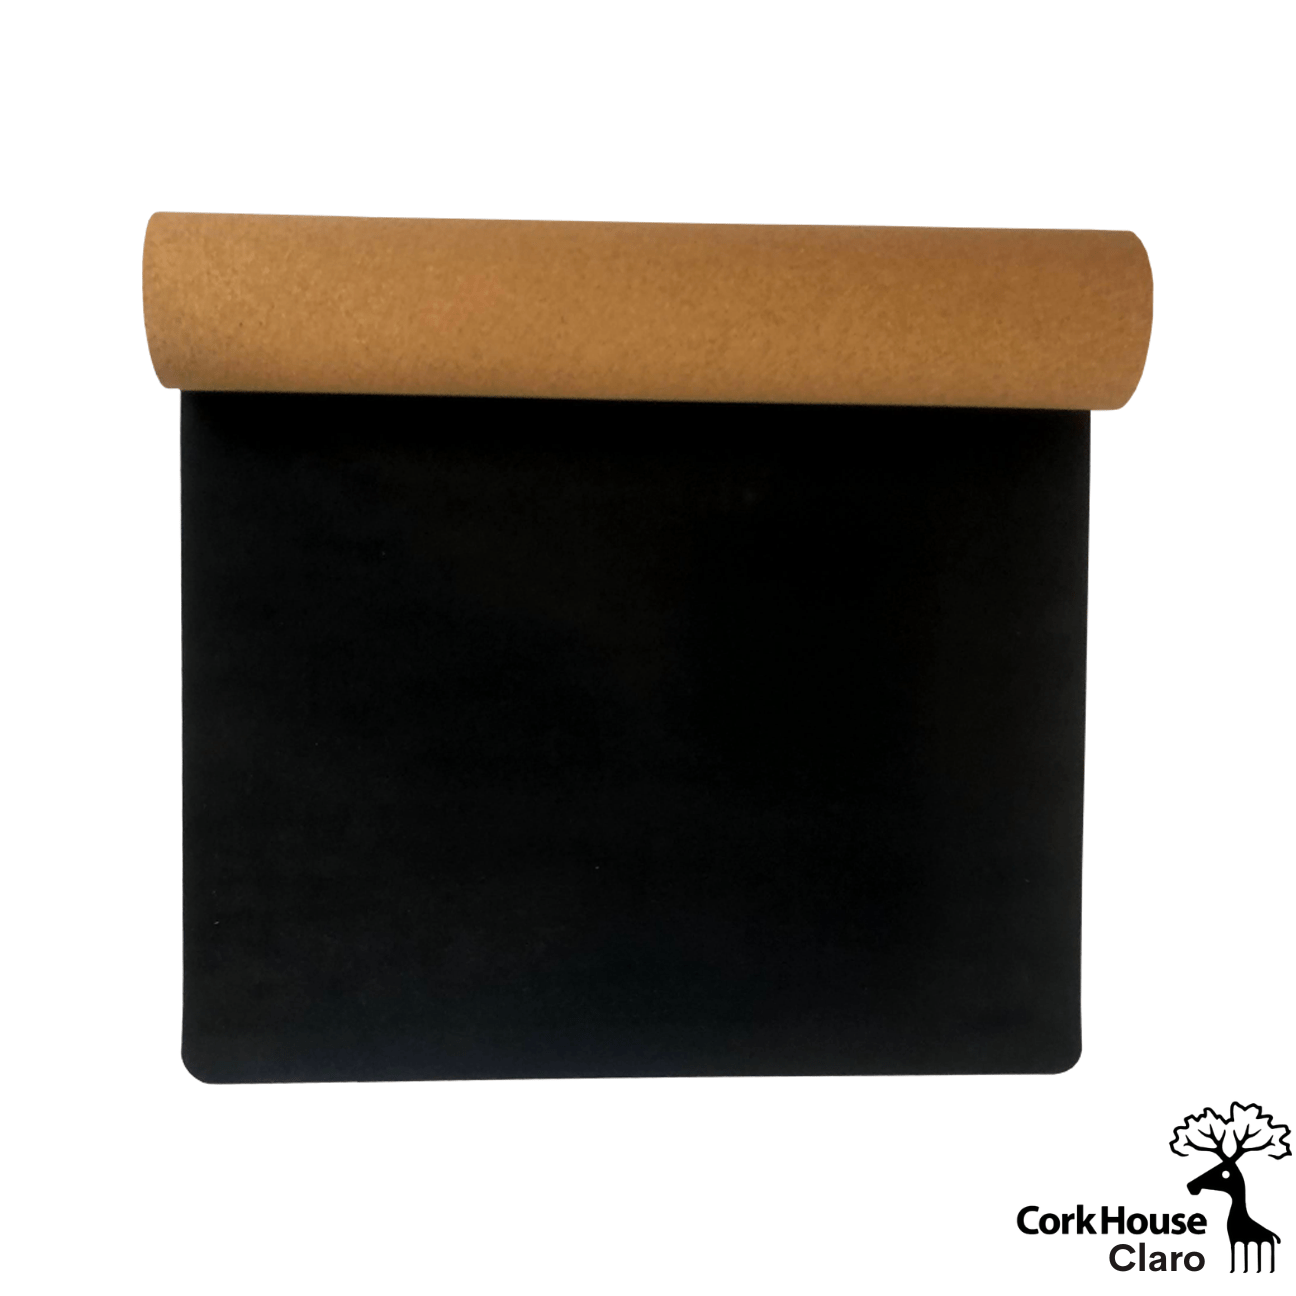 A cork yoga mat partially rolled showing the black underside made of natural rubber for optimal grip.